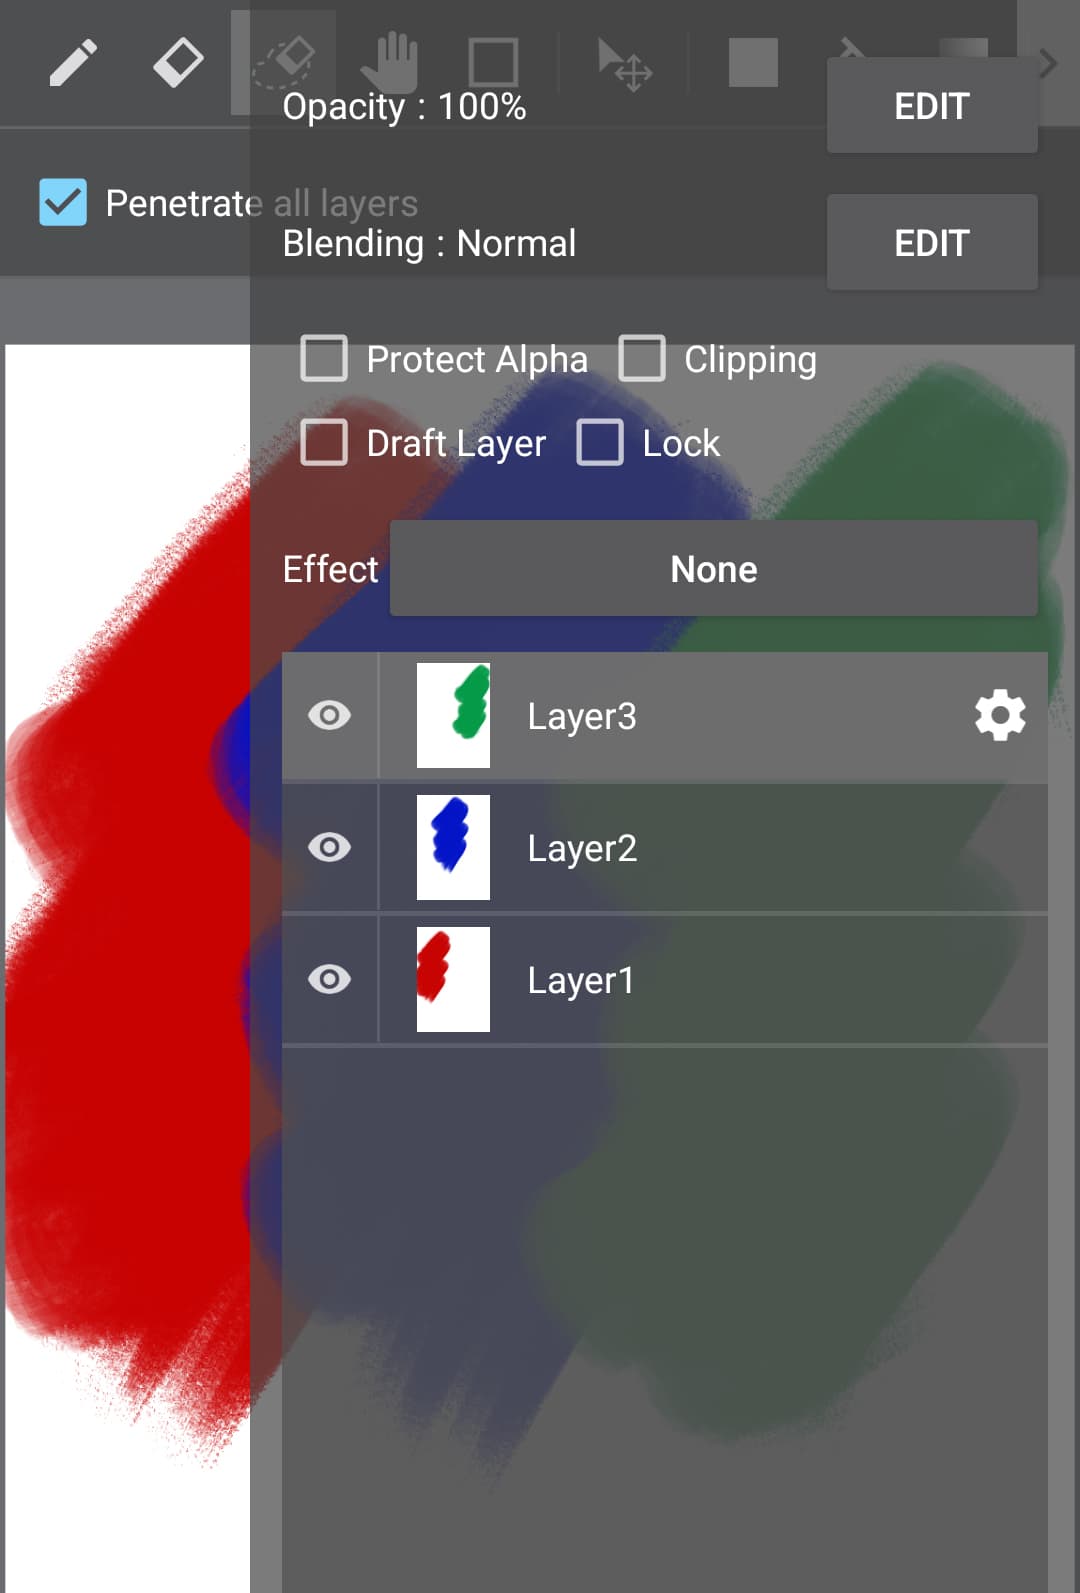 [android] How to Use the Eraser(Lasso) Tool - Penetrate all layers